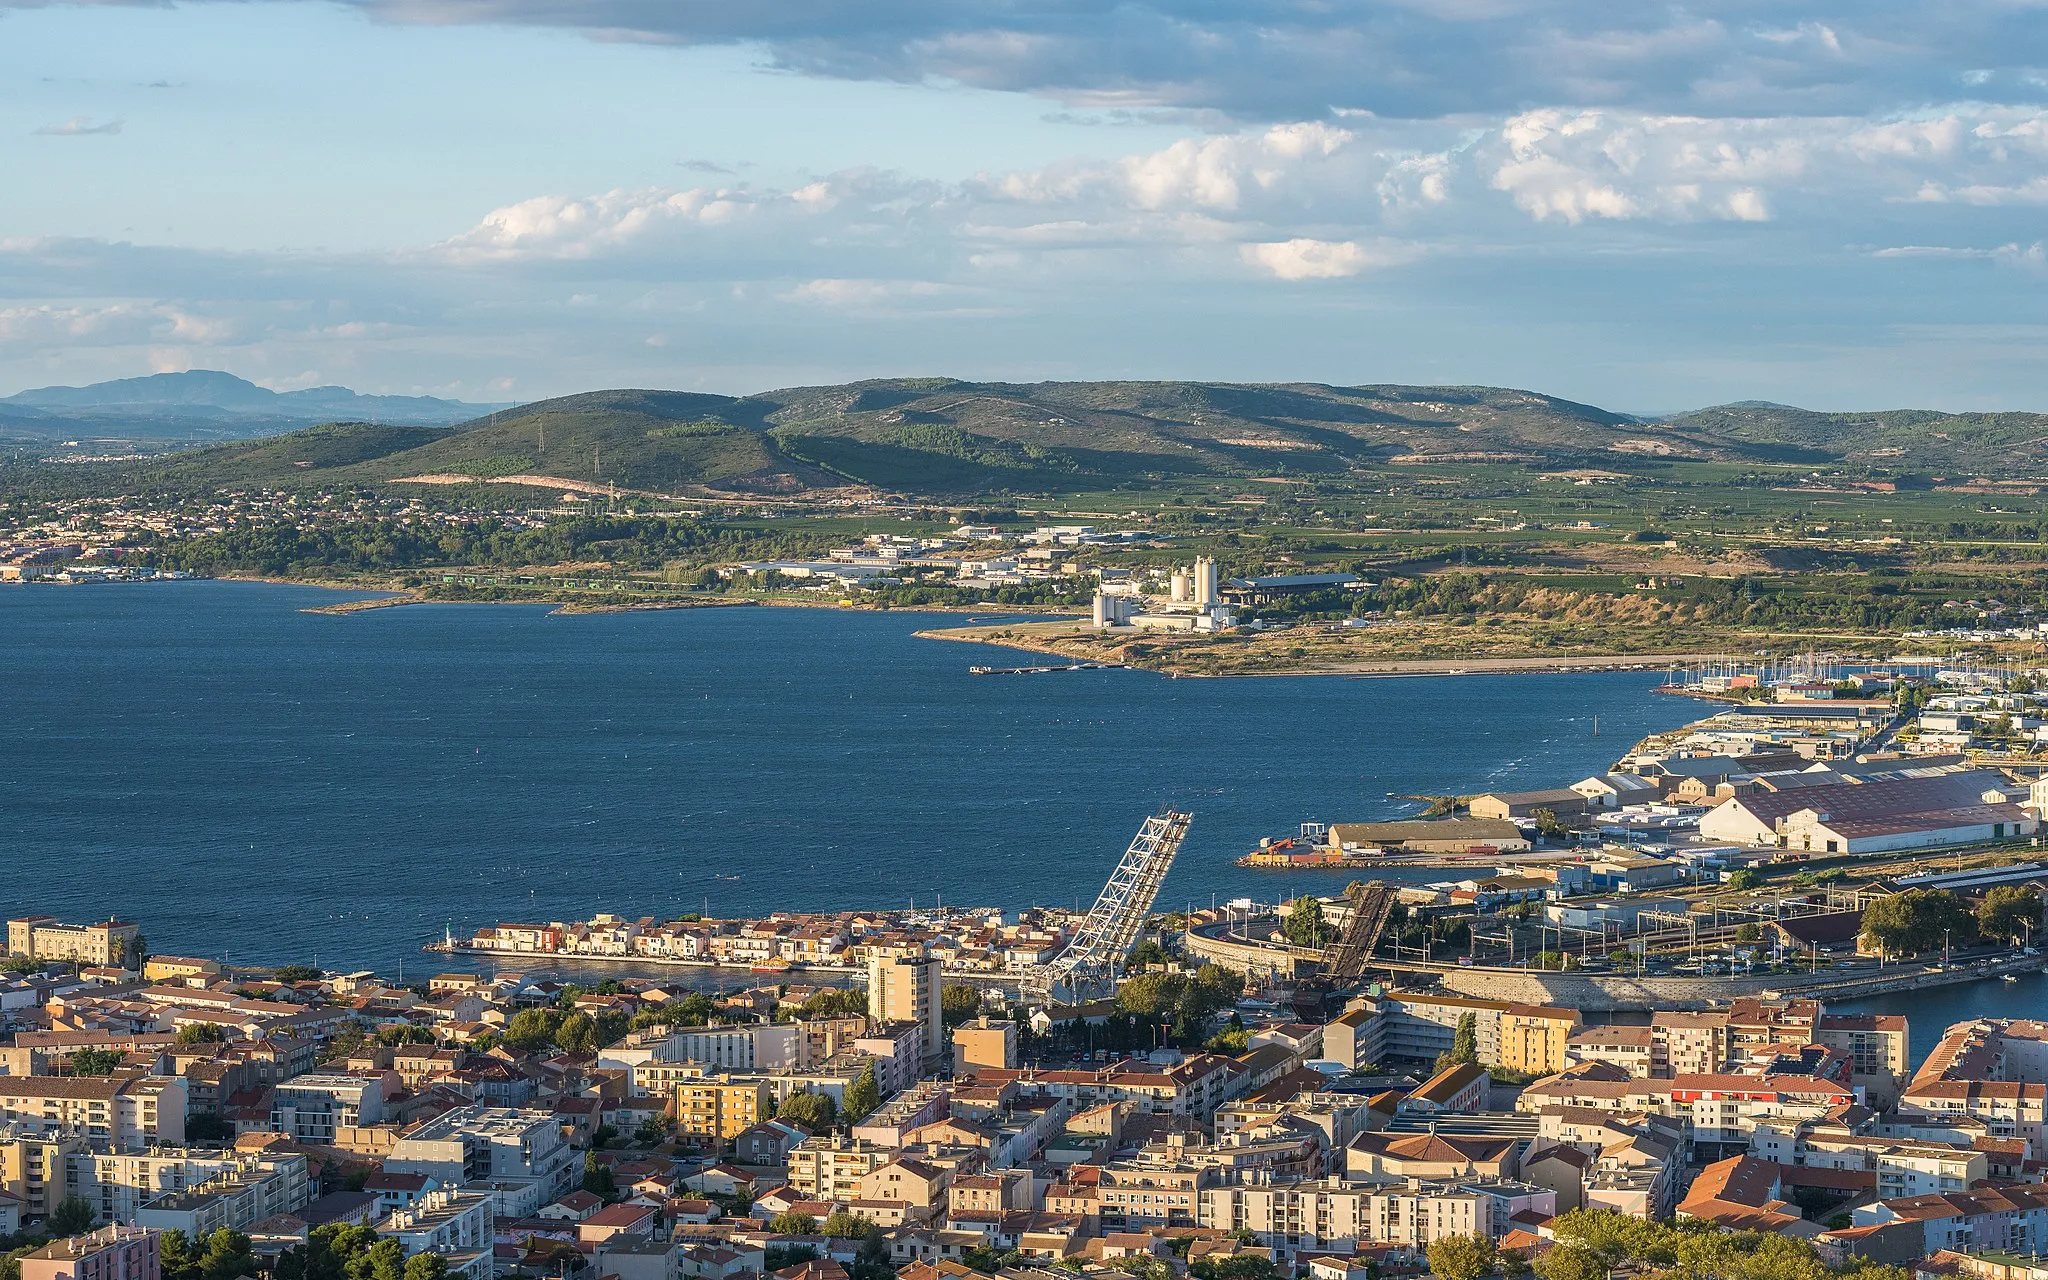 Photo showing: The Eastern end of the Étang de Thau from the Mount Saint-Clair in Sète, Hérault, France. In the foreground, a part of the town of Sète with the Pointe Courte Neighbourhood, the Maréchal Foch and Sadi-Carnot Bridges (the both are bascule bridges, here in open positions) over the Canal of Sète, and the train station. In background, at right a part of the commune of Frontignan, at left a part of the commune of Balaruc-les-Bains and behind the both the La Gardiole Mountain.